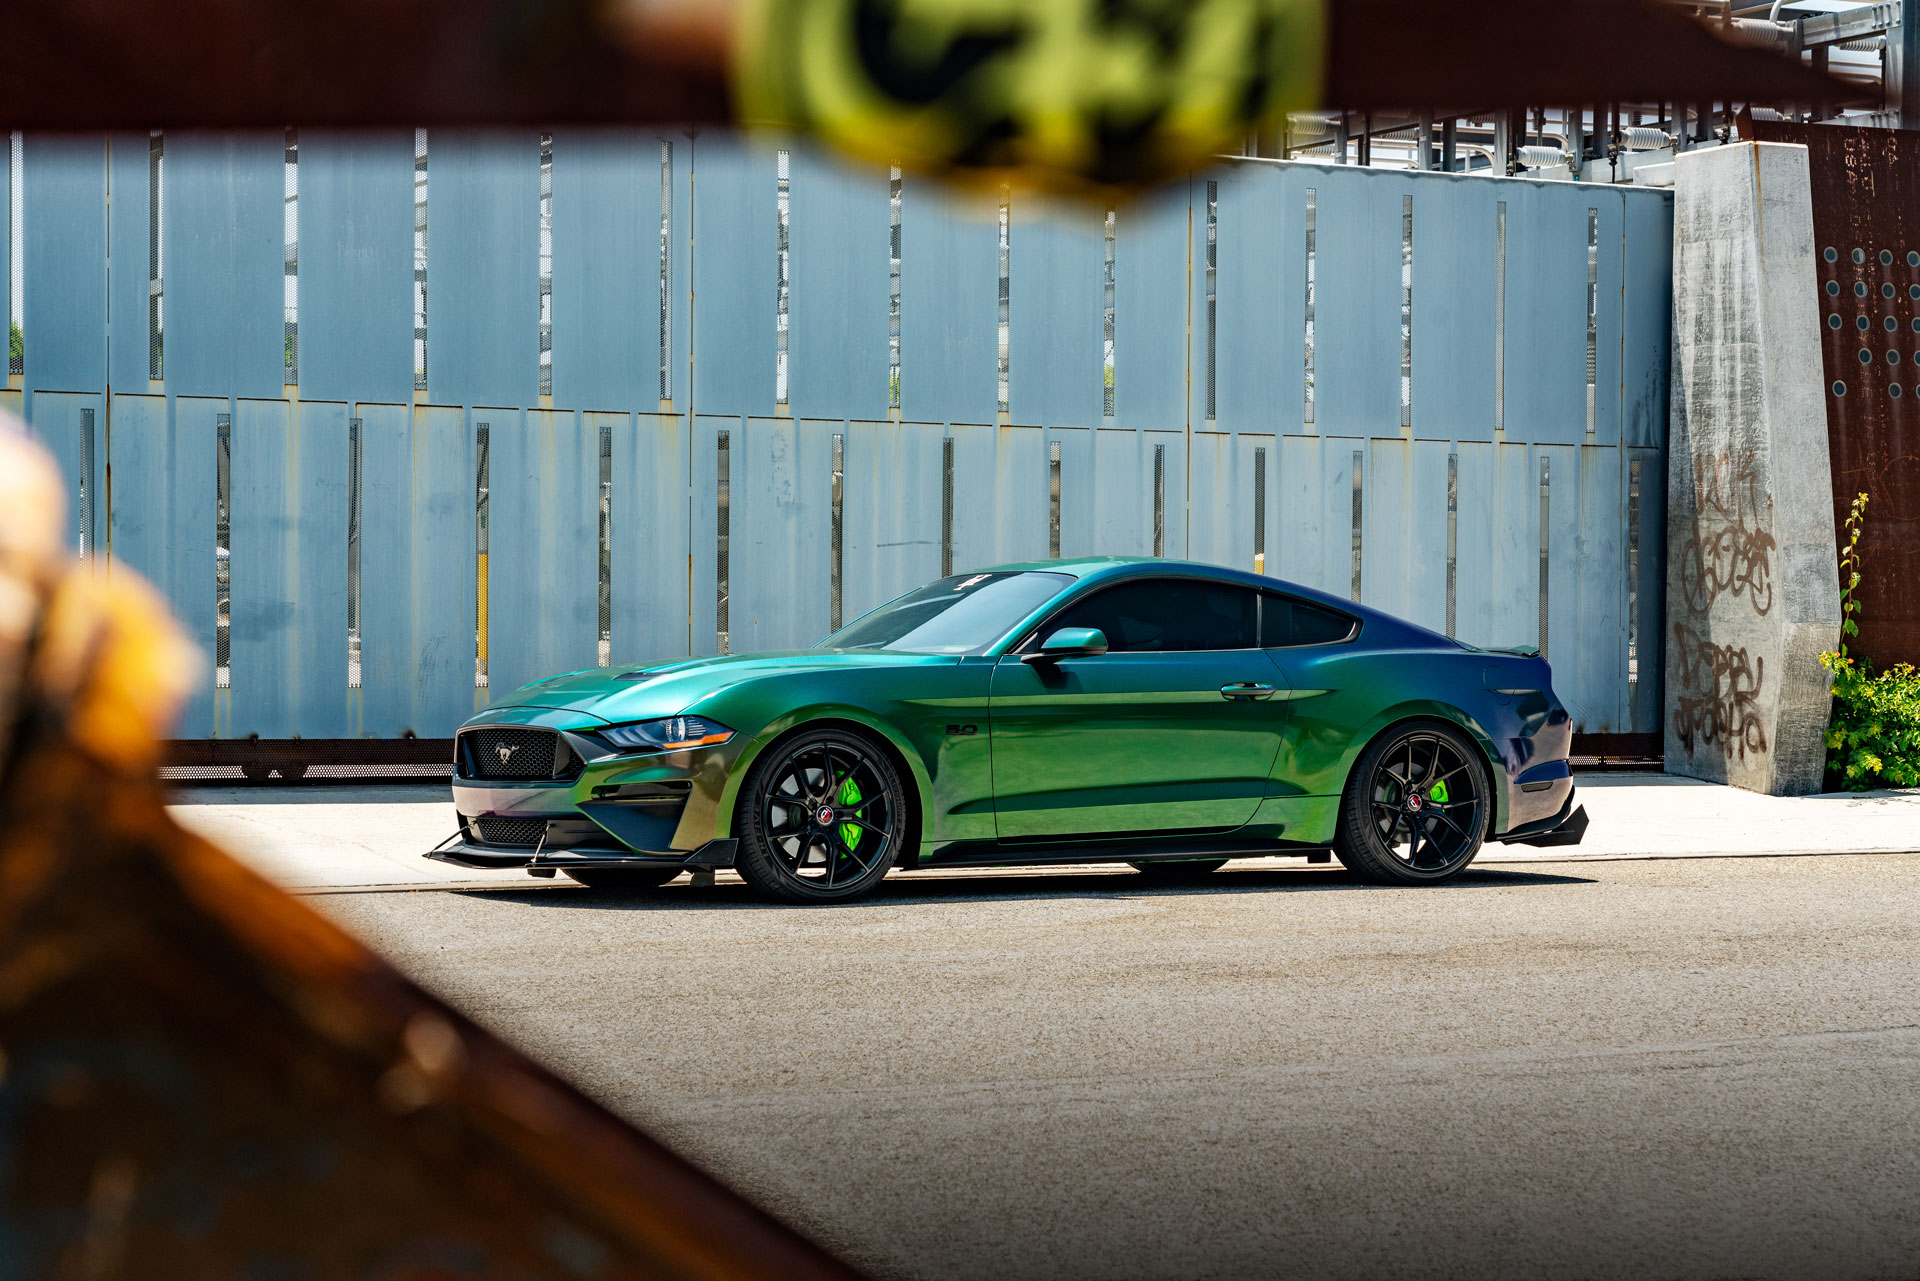 Curva Concepts C42 Aftermarket Wheels on a Chameleon Wrapped Ford Mustang GT